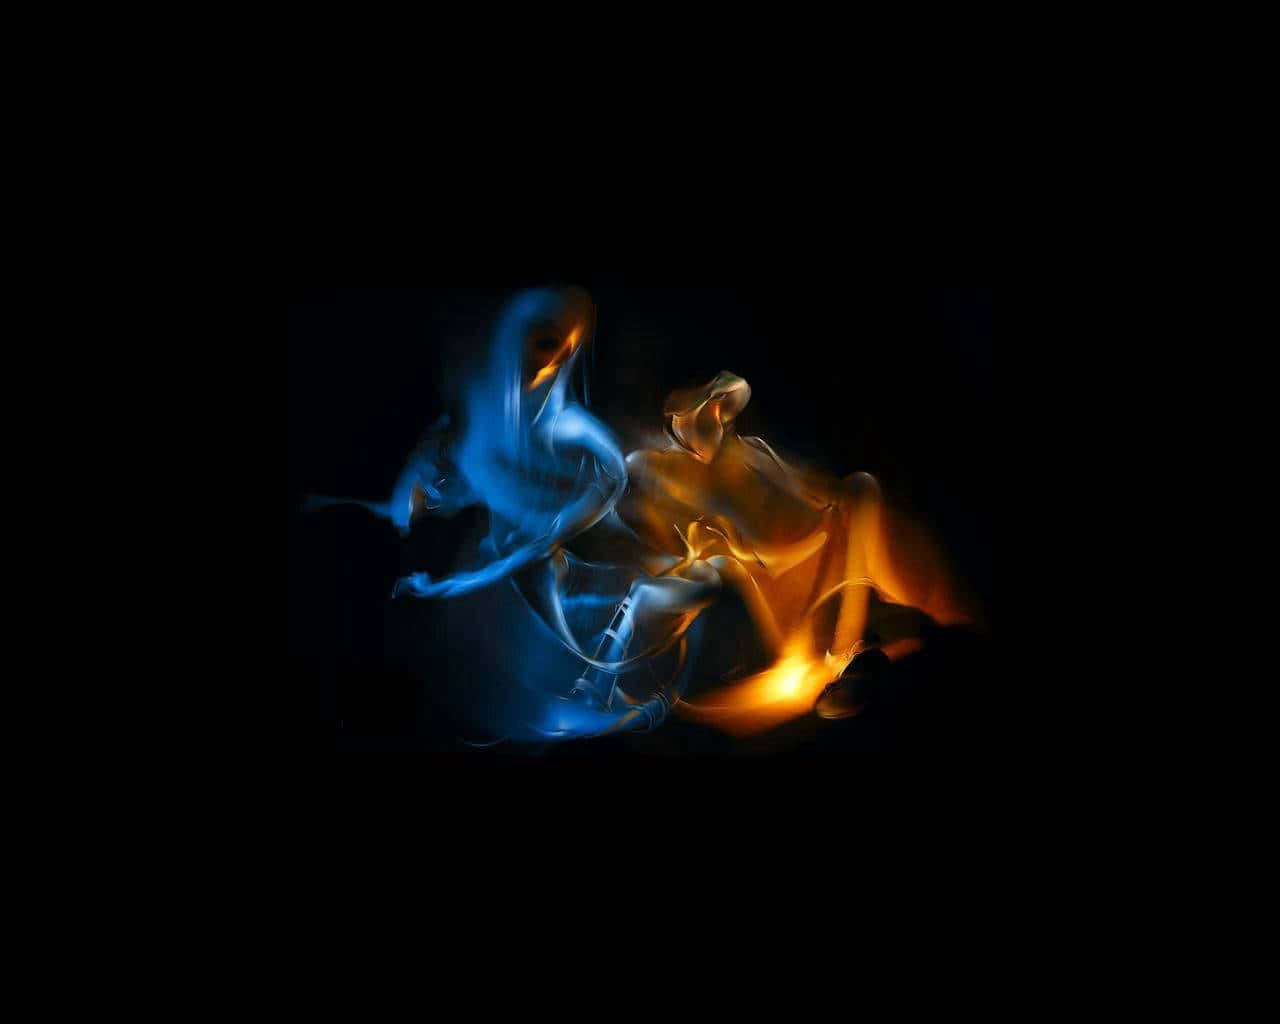 Figures Enveloped In Red And Blue Fire Wallpaper